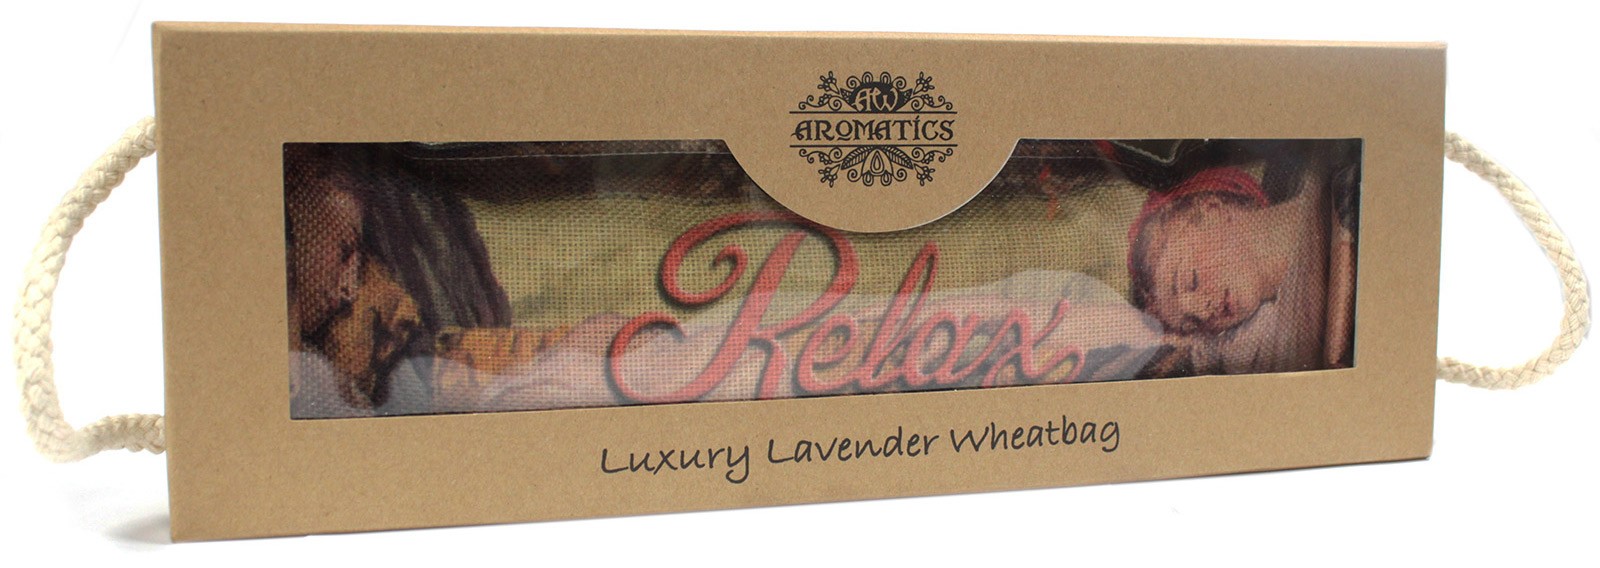 Luxury Lavender Wheat Bag in Gift Box - Sleeping RELAX